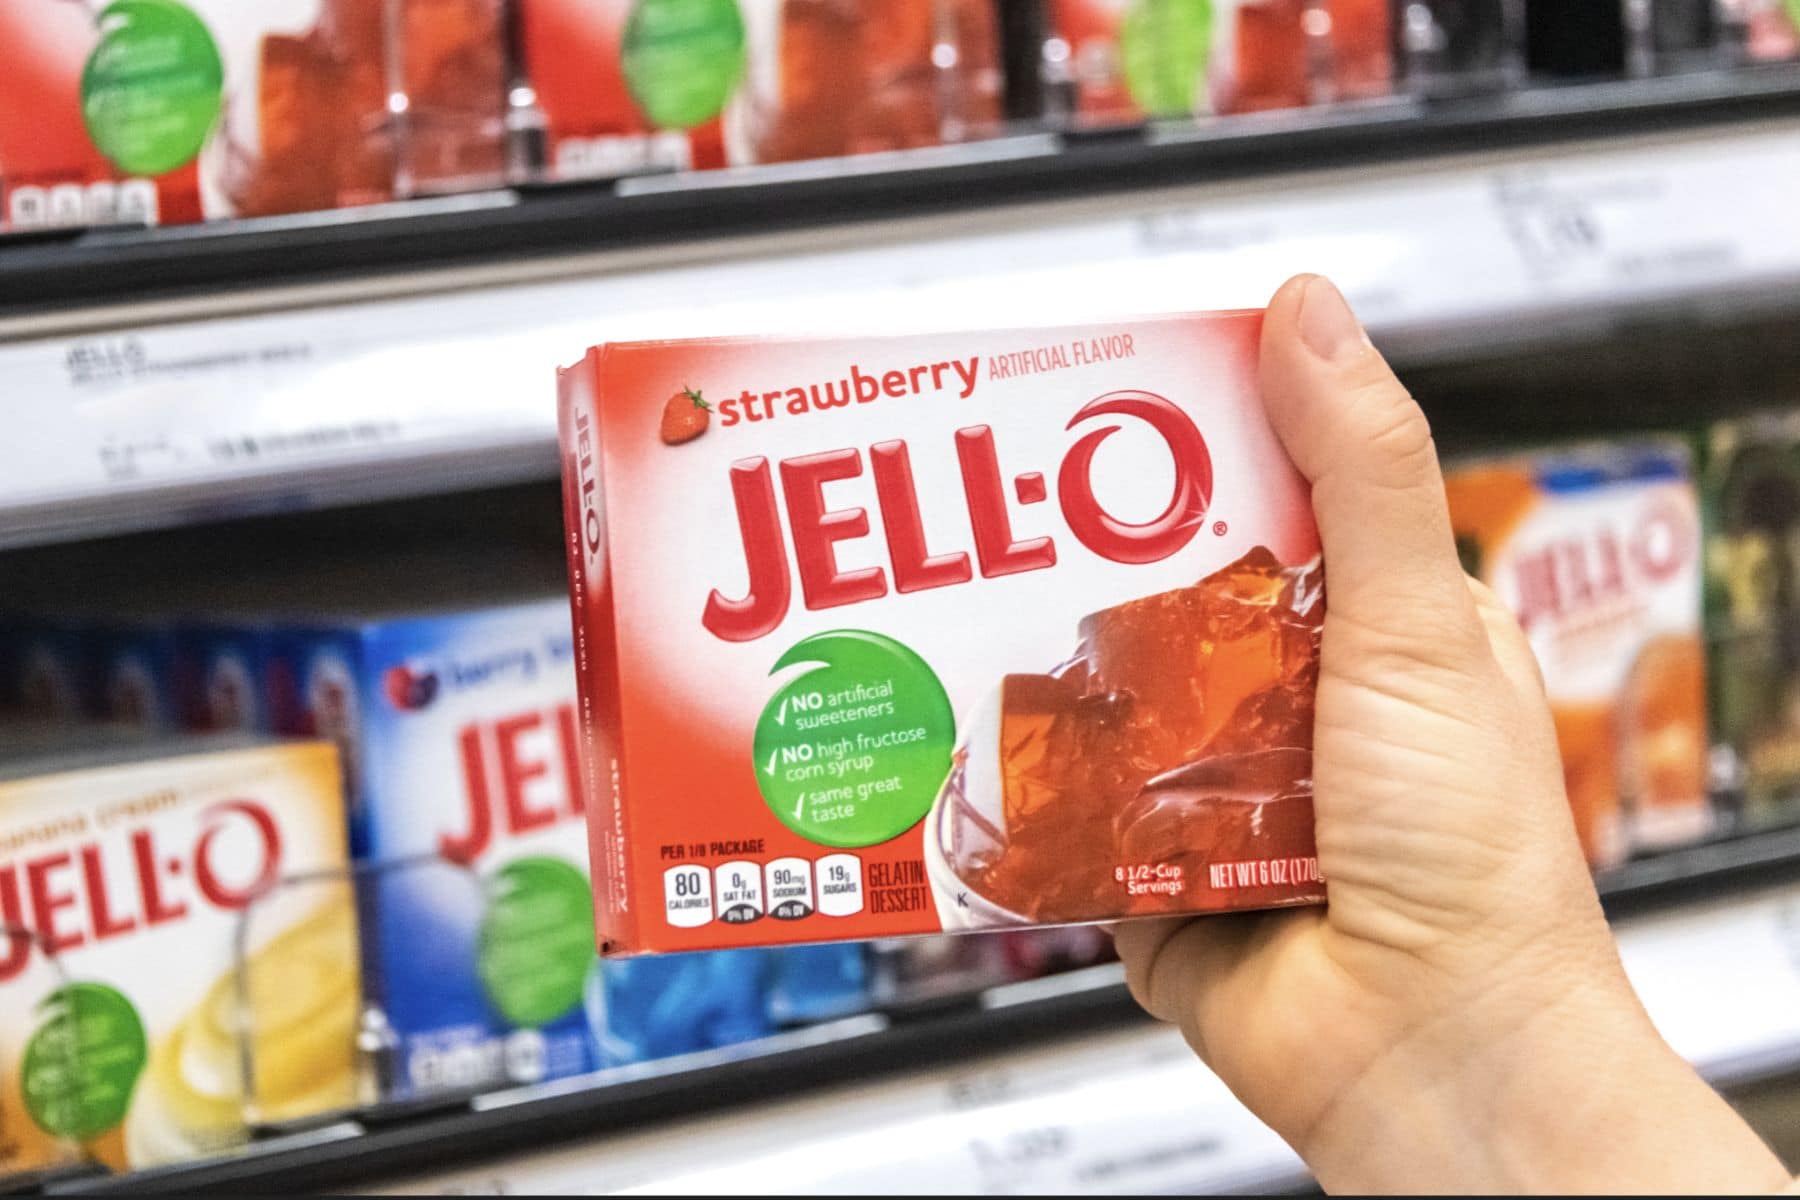 shoppers hand holding a box of Jell-o strawberry gelatin dessert at a supermarket aisle